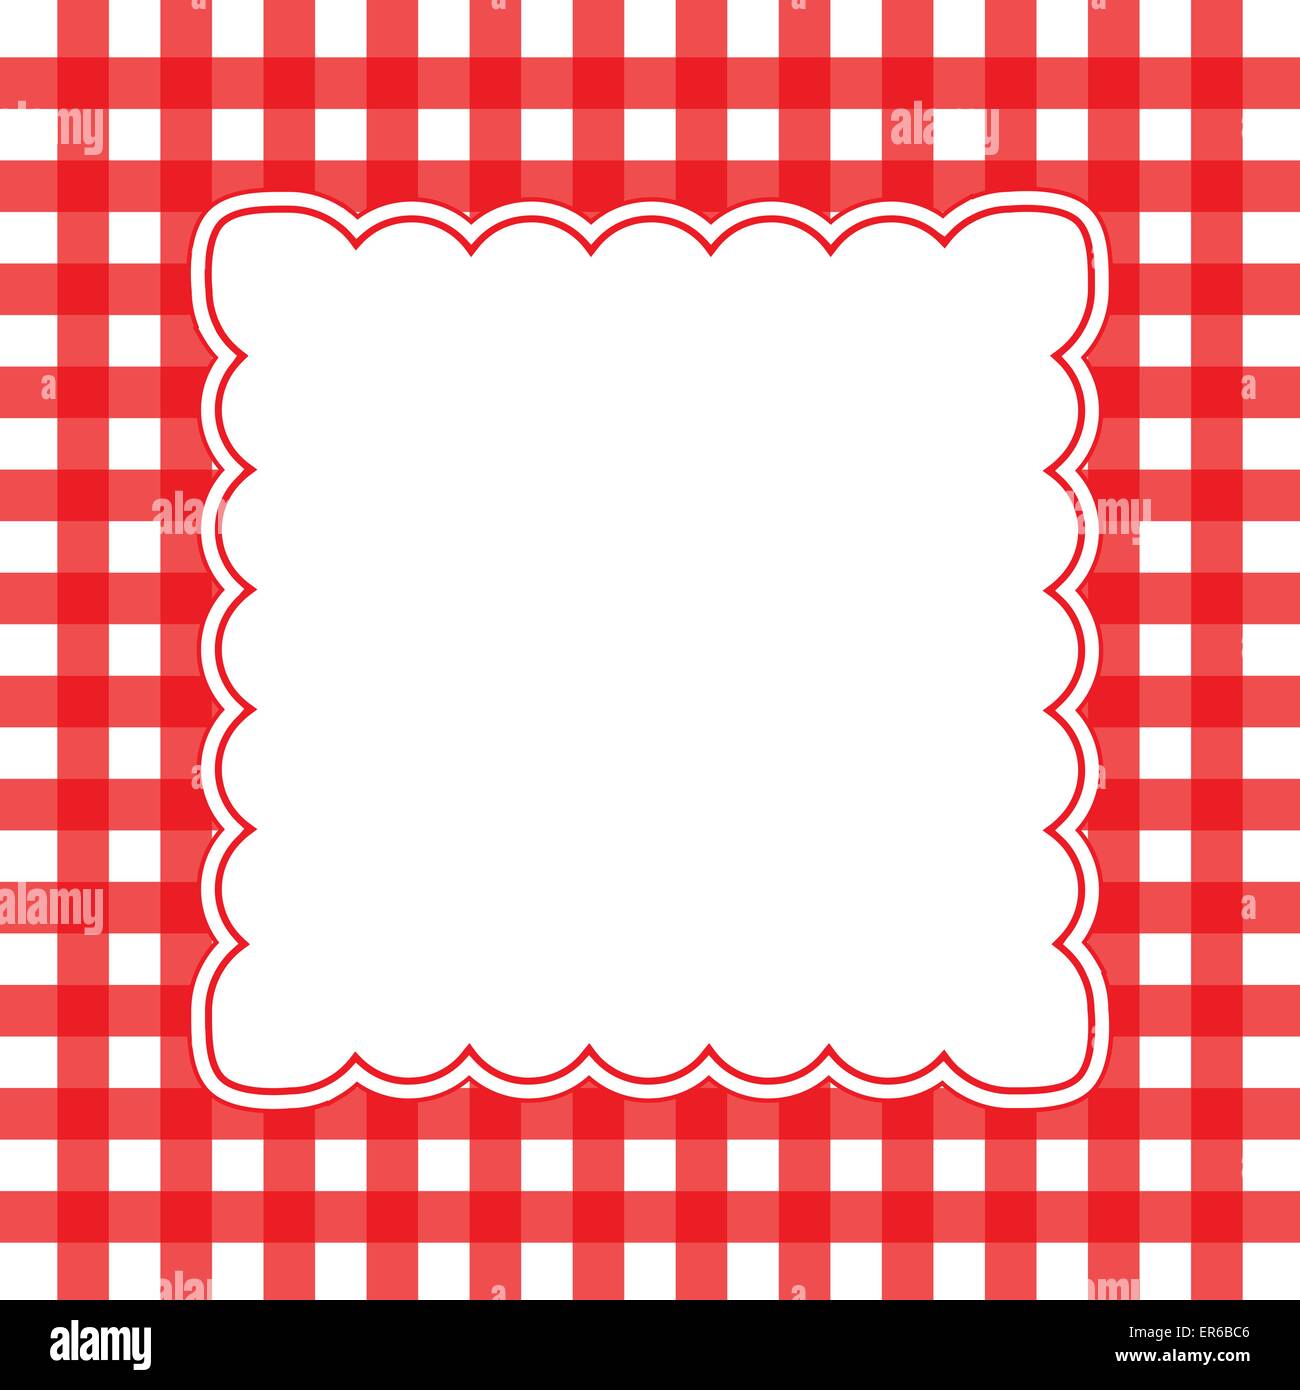 Vector illustration of red and white gingham concept background Stock Vector